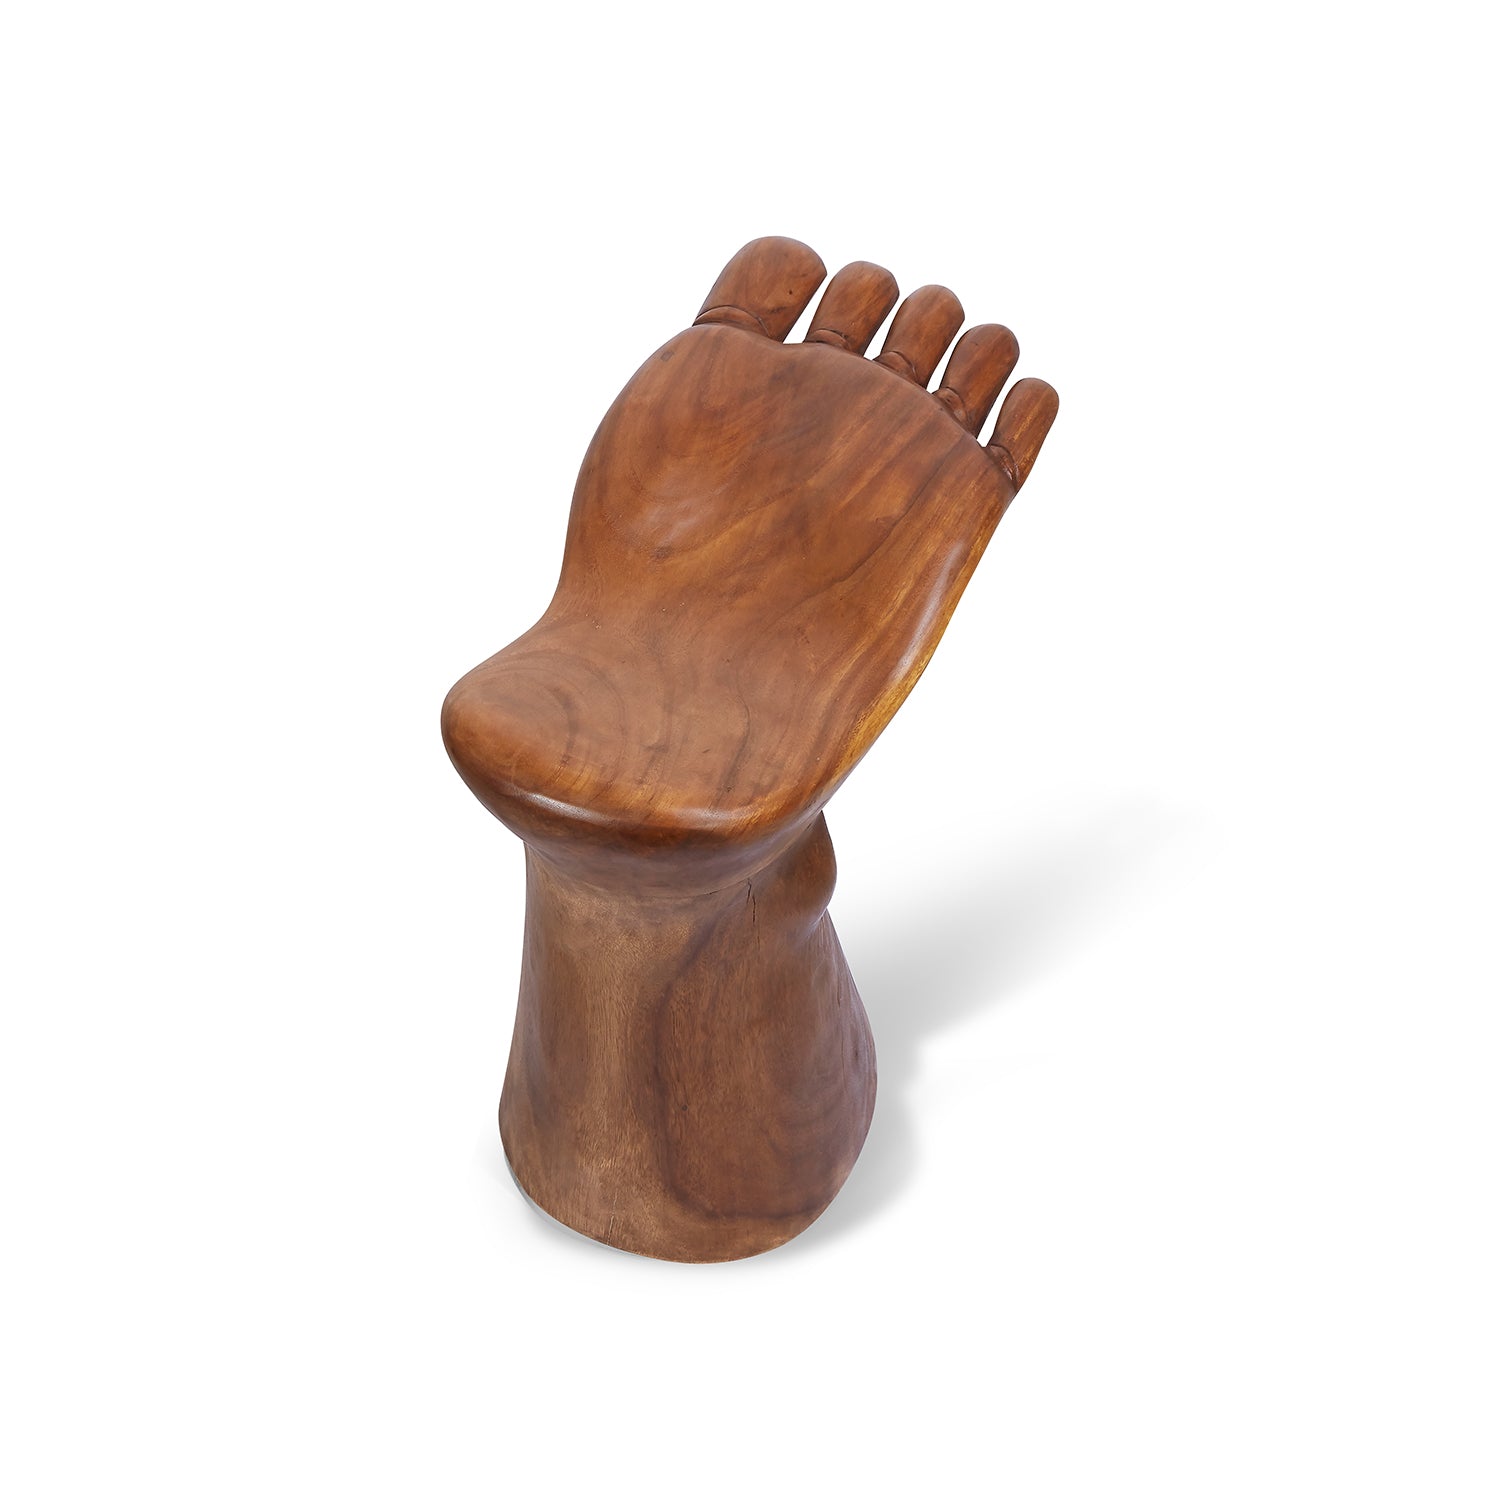 The Foot Chair